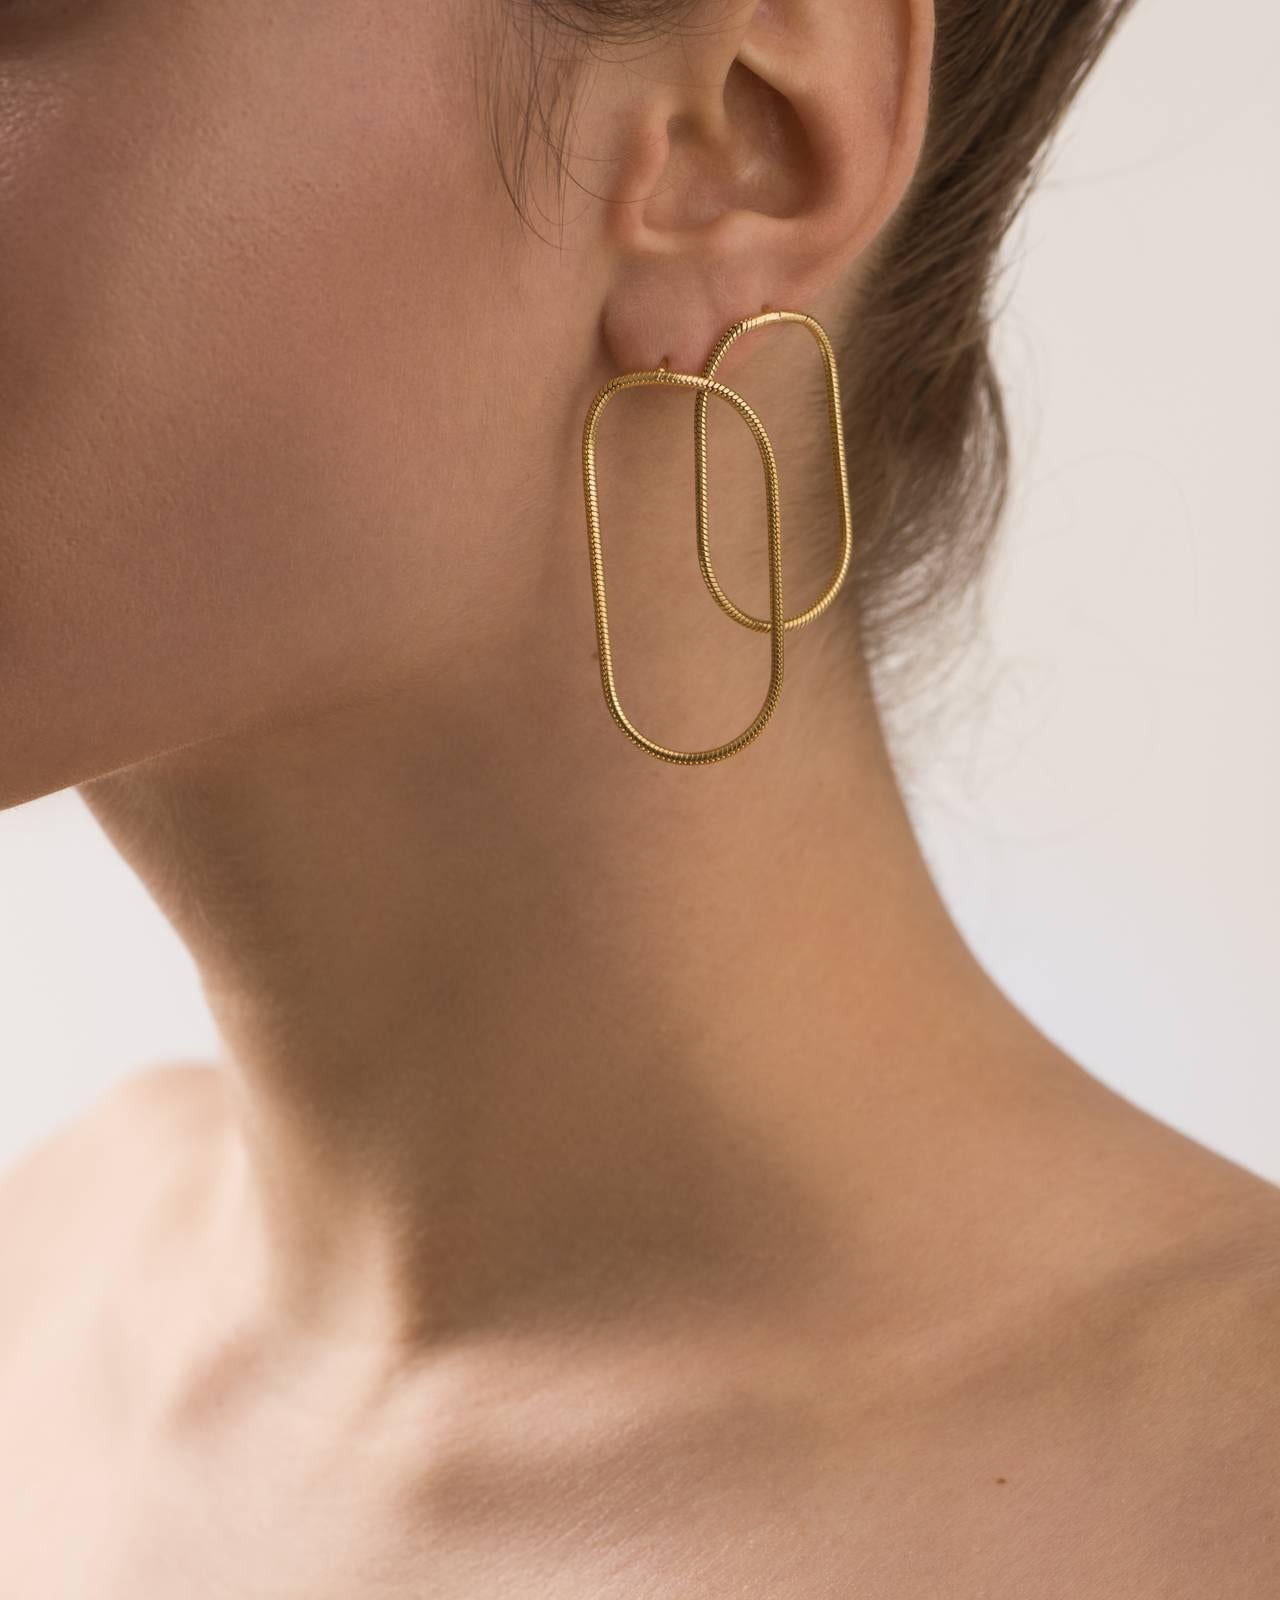 Halo earrings 

These 18 K- gold plated silver earrings are available in 4 lengths (see in pictures). The price listed is for the medium size. They offer a minimal and modern look. They also look good styled with different sizes and worn in multiple